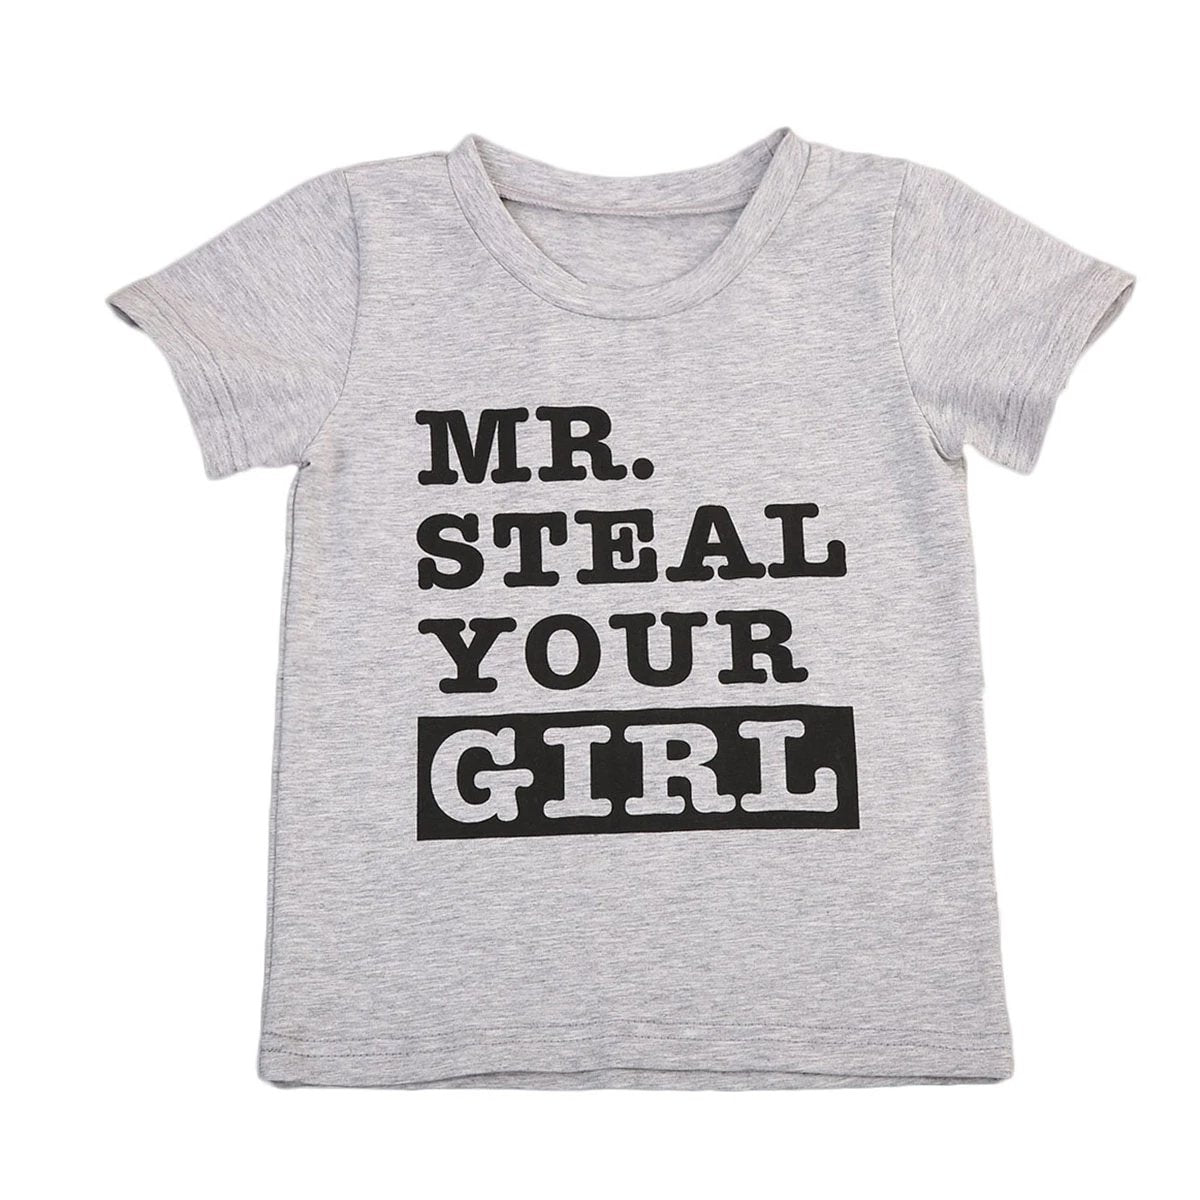 "Mr. Steal Your Girl" Casual Tee